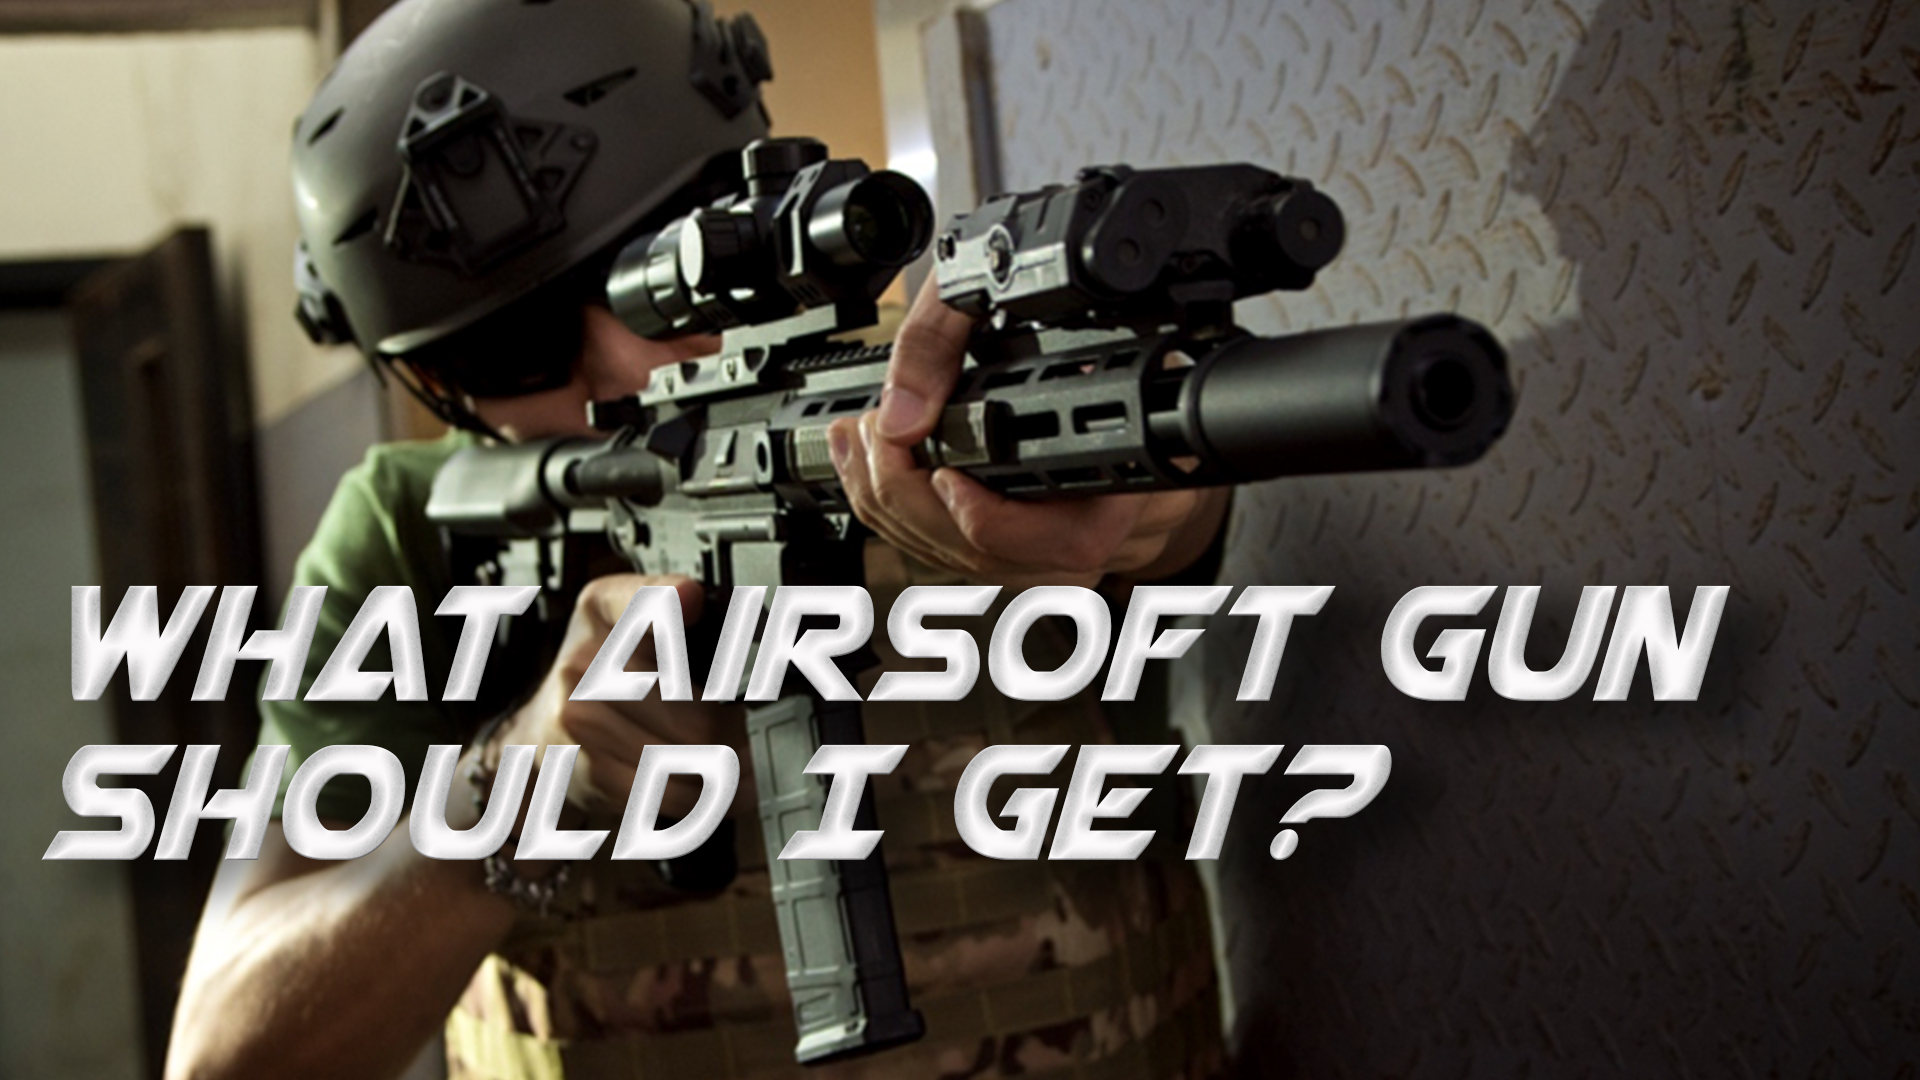 Top Airsoft Questions - Sniper Rifle Edition